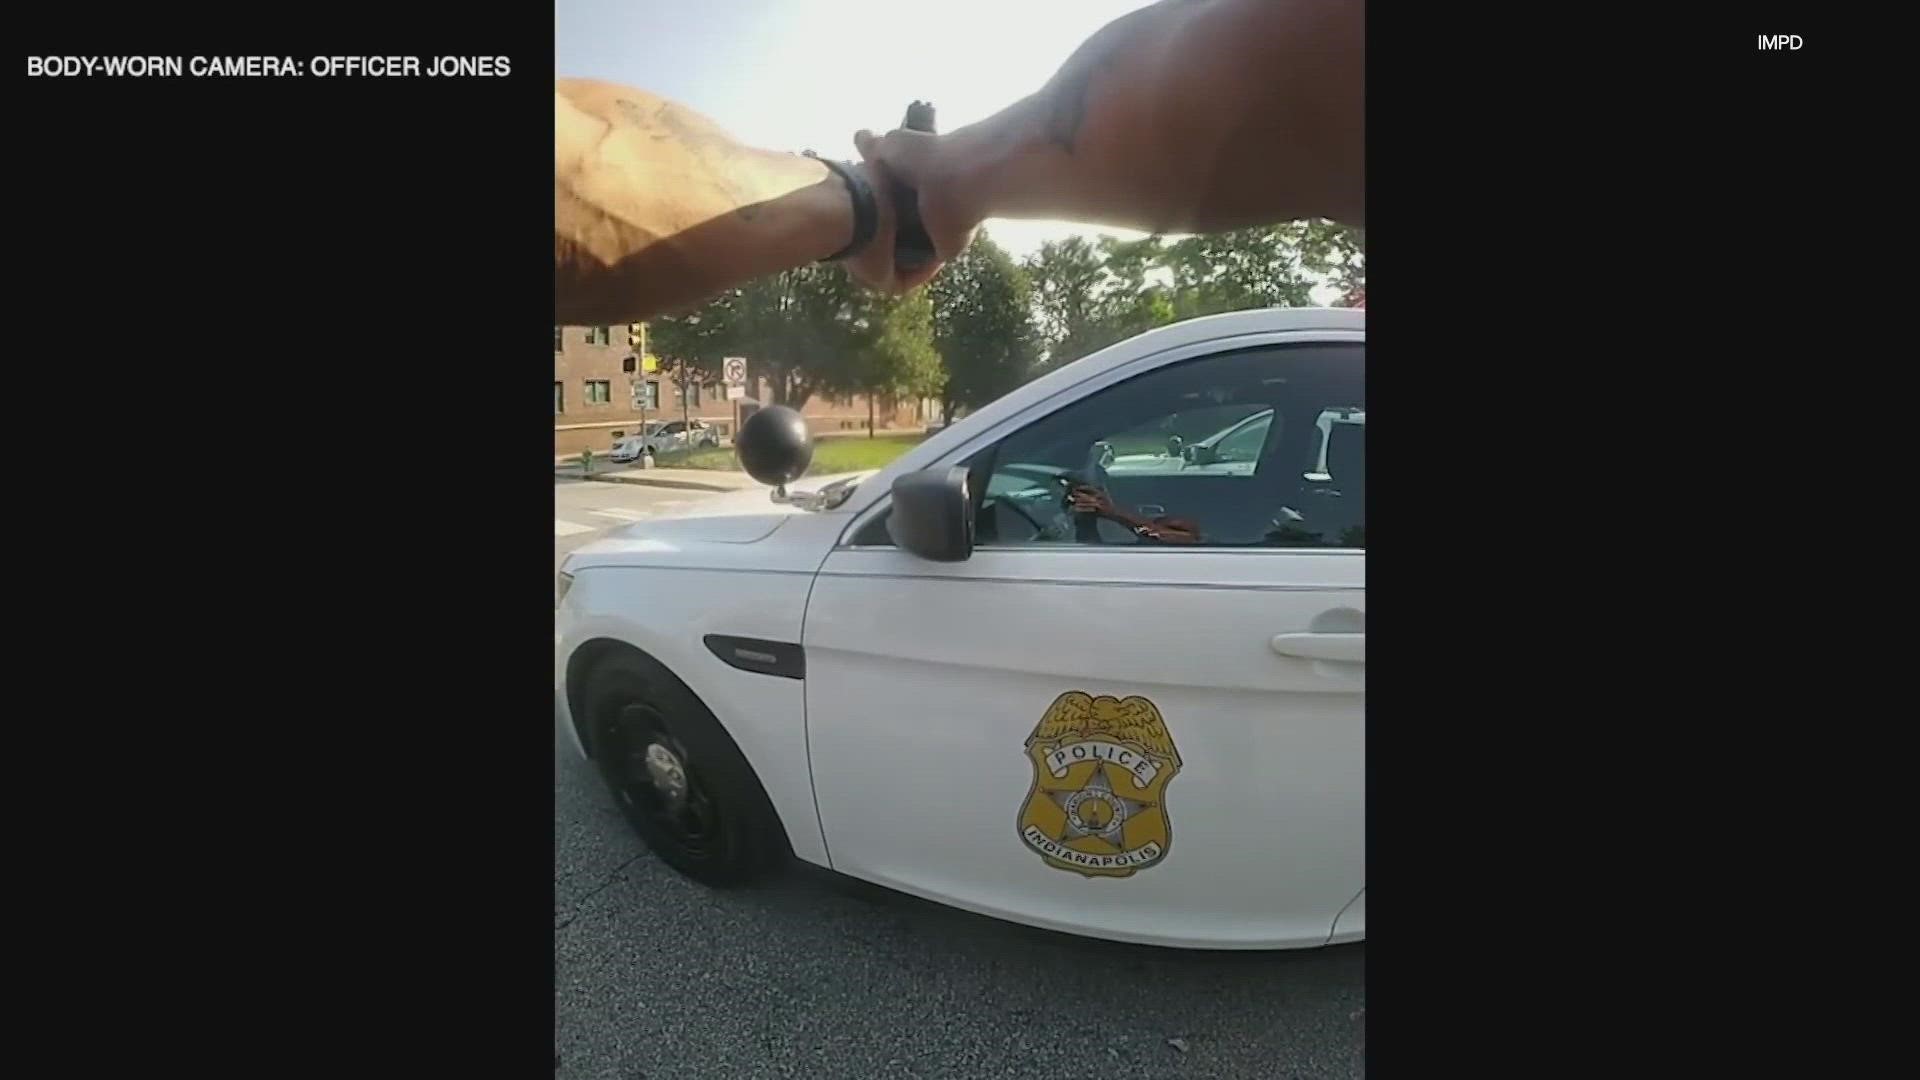 The bodycam video shows officers in their encounter with Orlando Mitchell